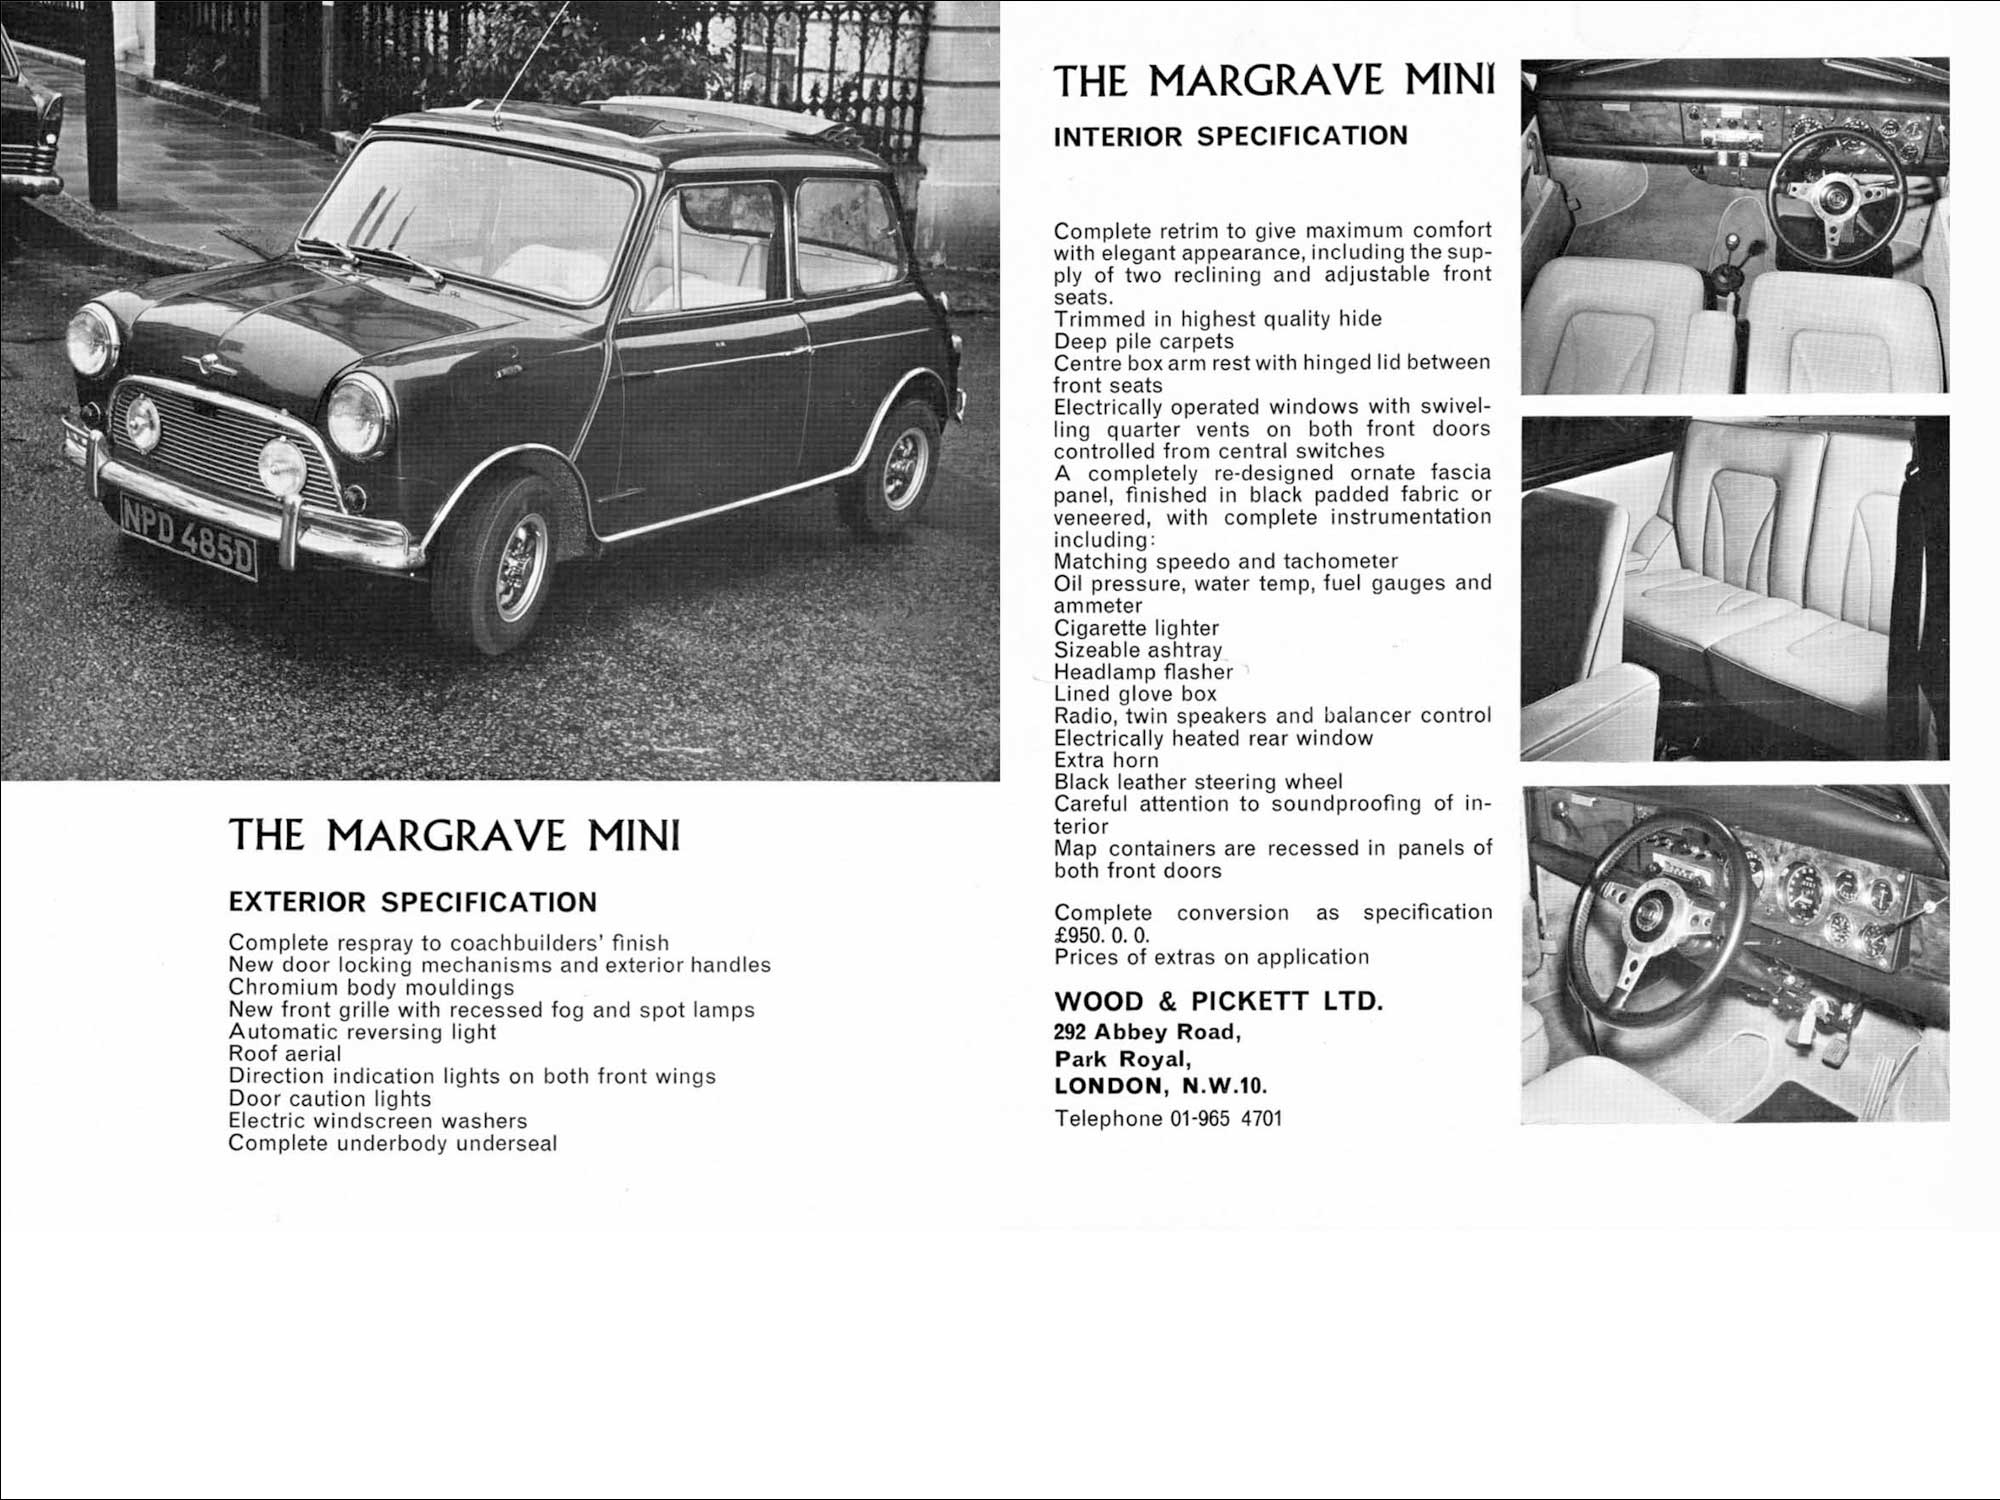 Wood & Pickett Margrave Mini brochure 1968 - With many thanks to MK1-performance-conversions.co.uk